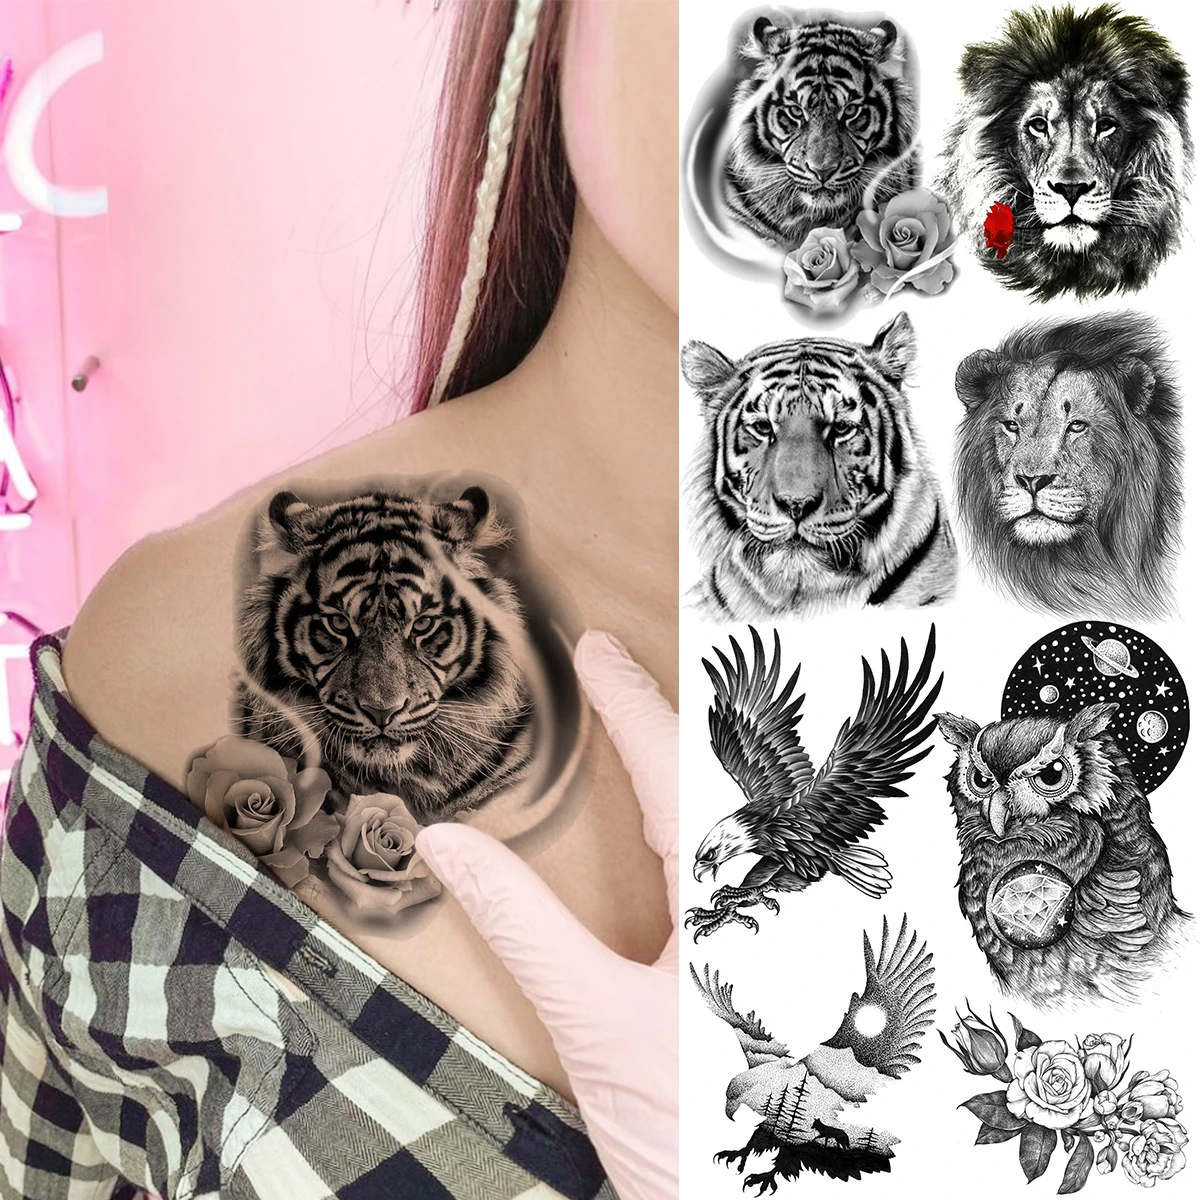 3D Tiger Rose Flower Temporary Tattoos For Women Adult Men Lion Eagle Owl  Fake Tattoo Realistic Body Art Decoration Tatoos Paper|Temporary Tattoos| -  AliExpress